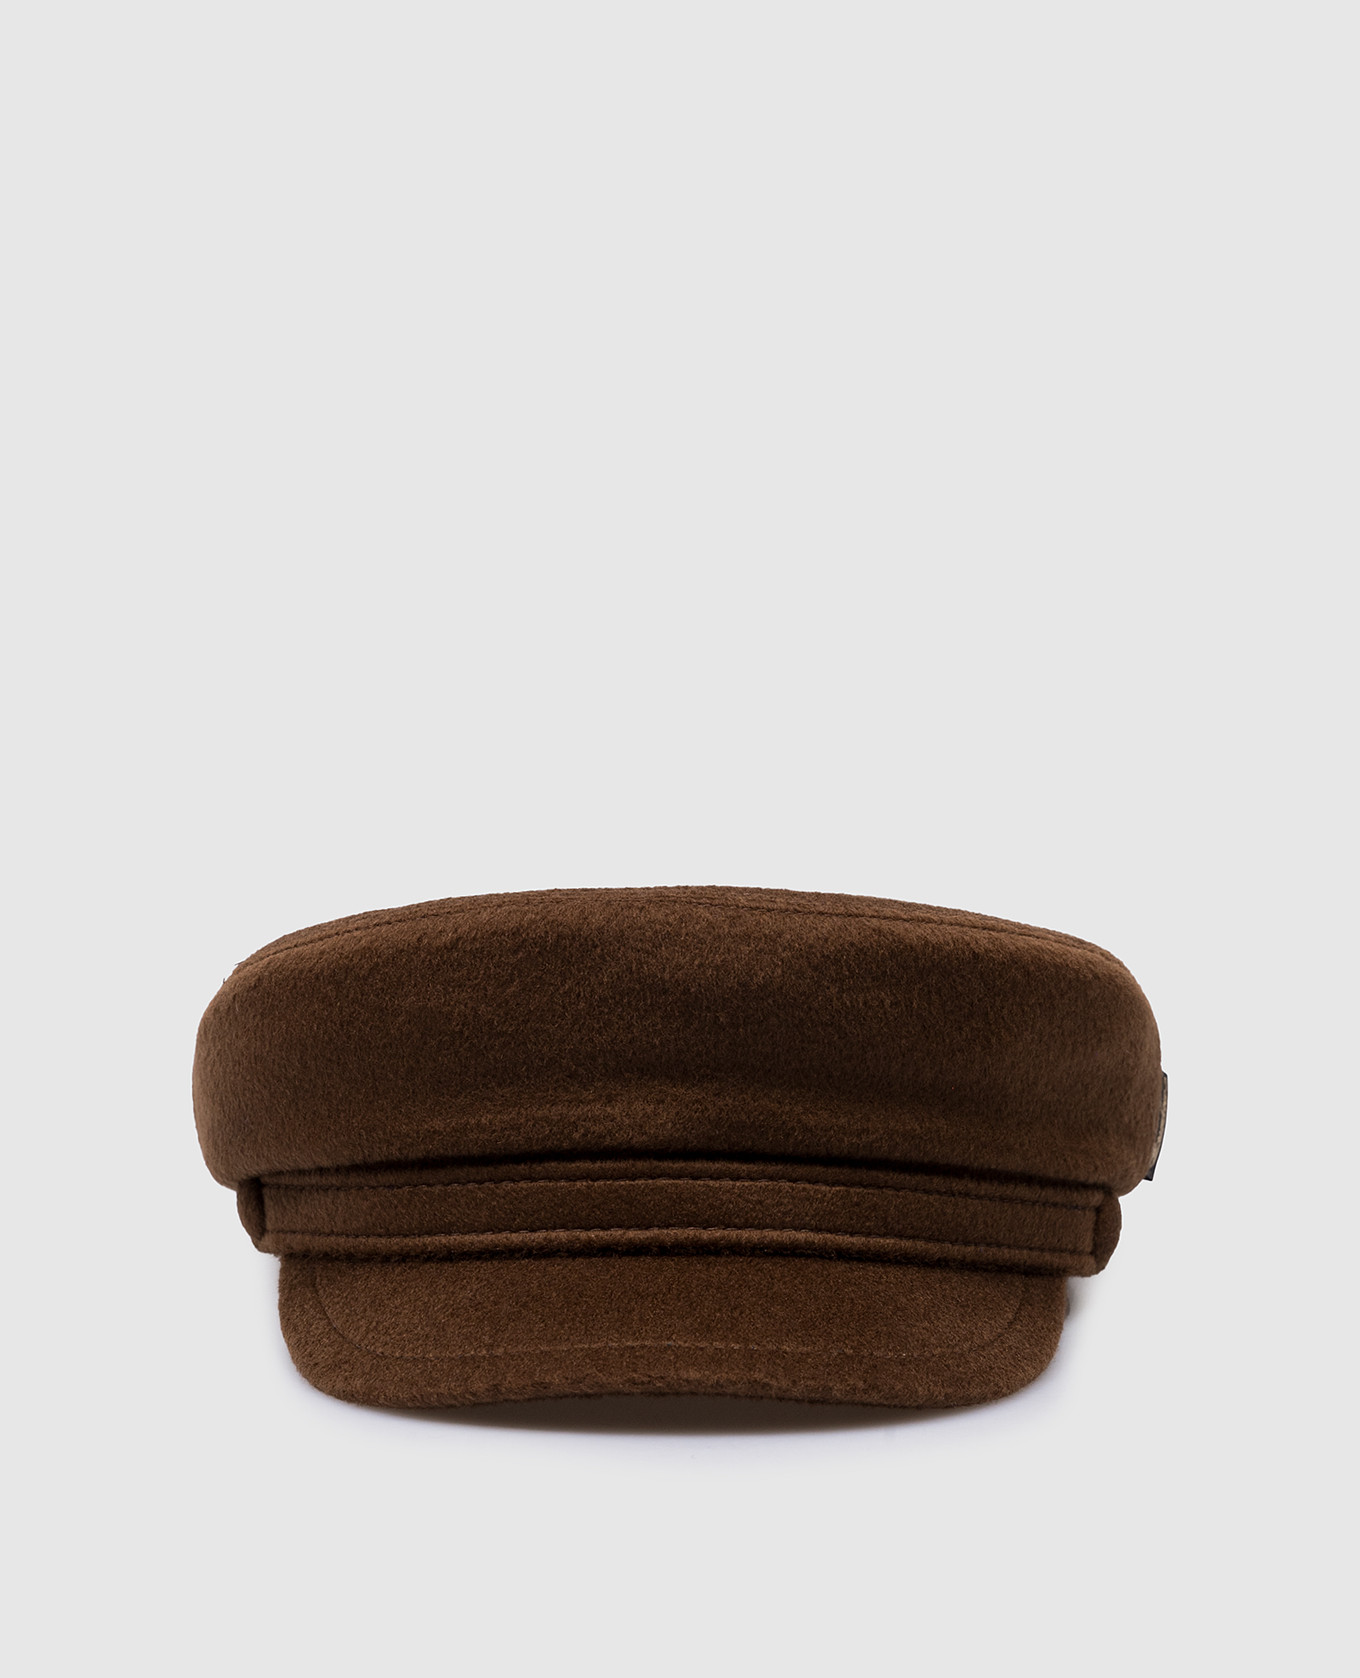 Brest brown cap made of wool